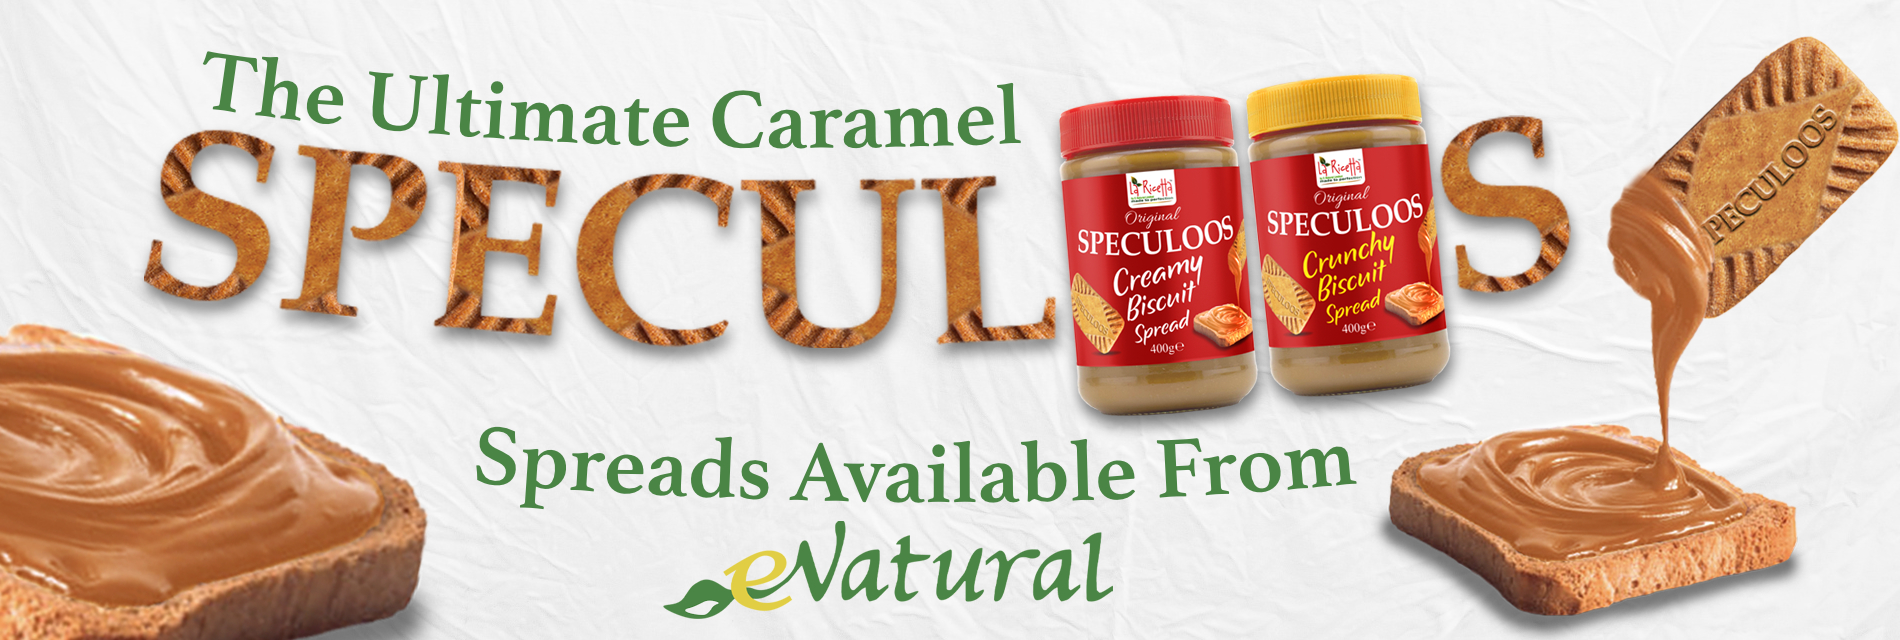 http://www.enaturalltd.com/product-category/grocery/jams-spread/speculoos-biscuit-spread/